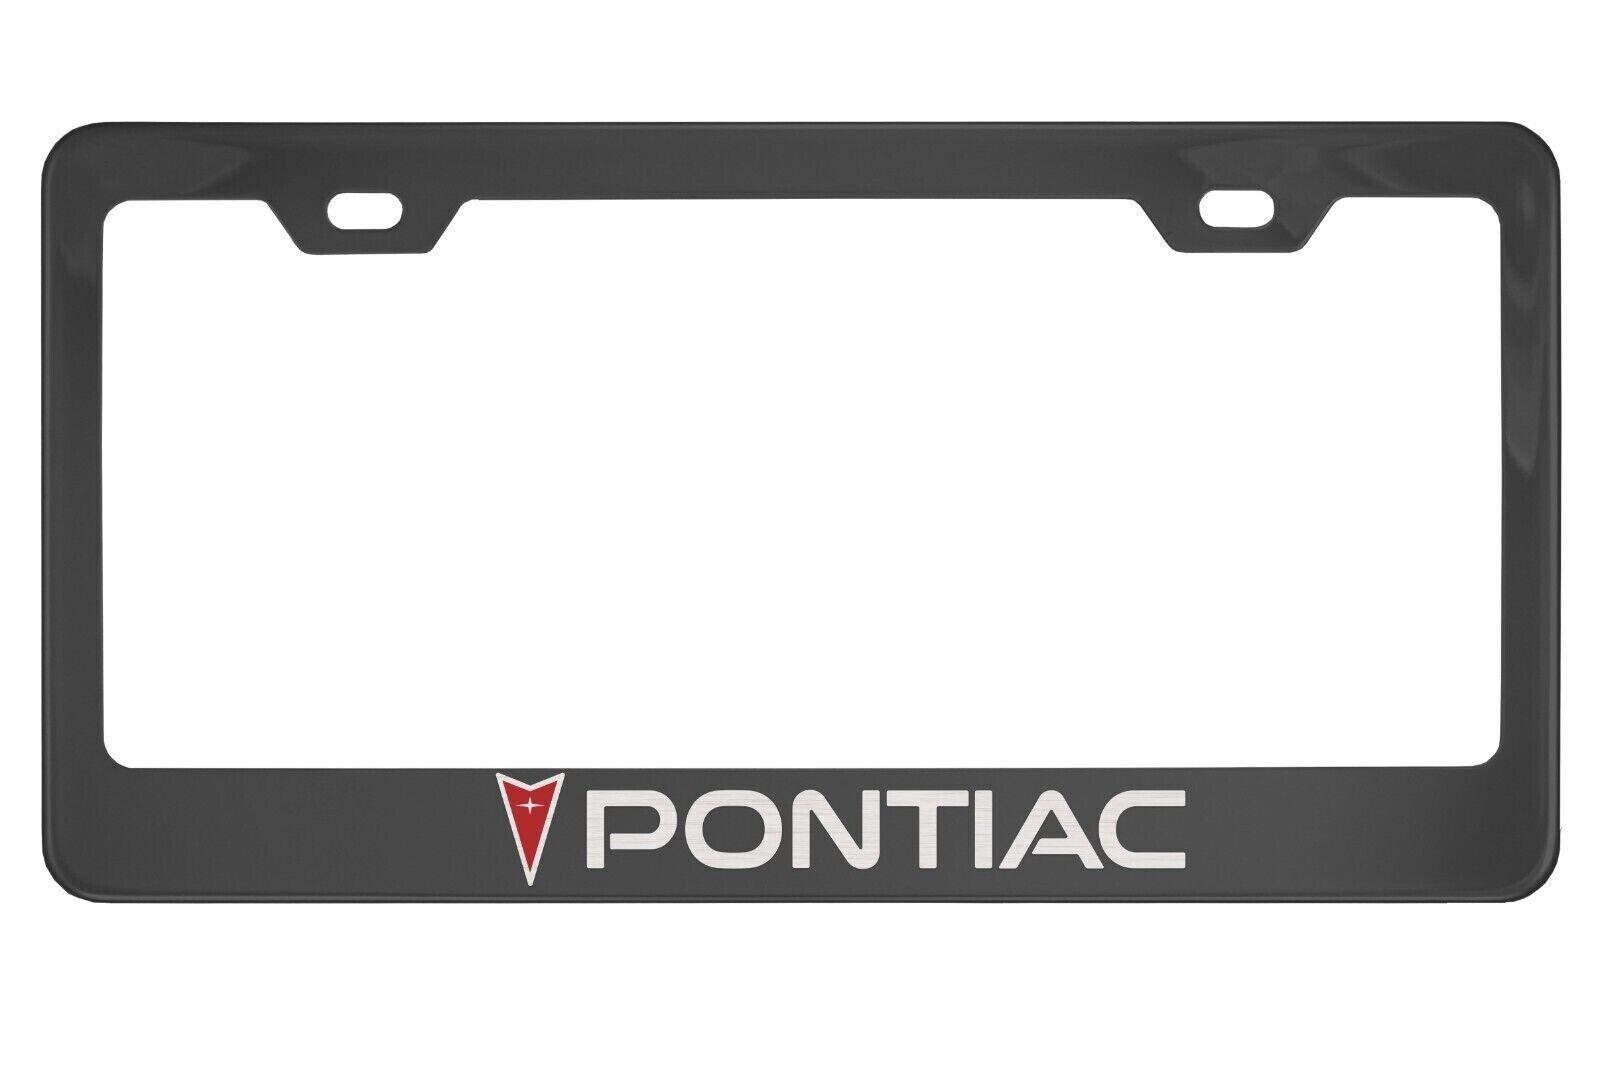 Pontiac  Black Metal License Plate Frame included 2 free screw caps and caps